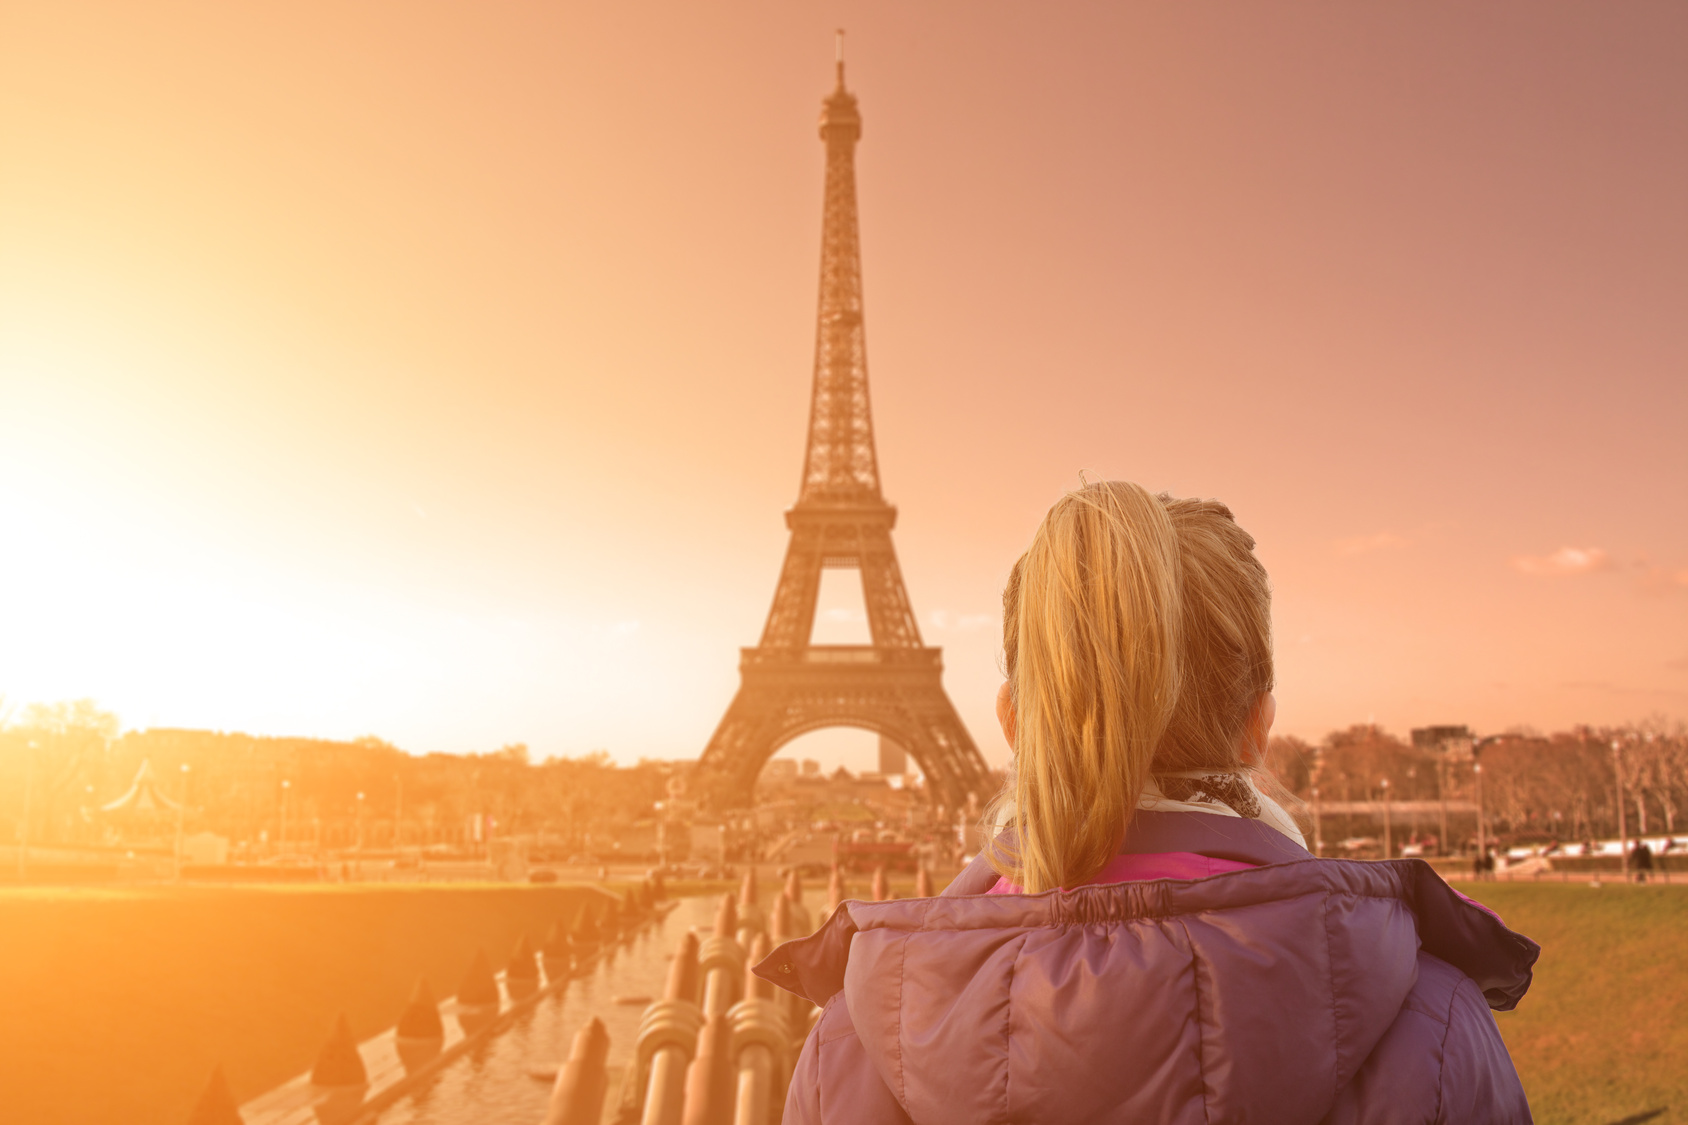 Lonesome girl watching at Paris city scape at sunset/sunrise.